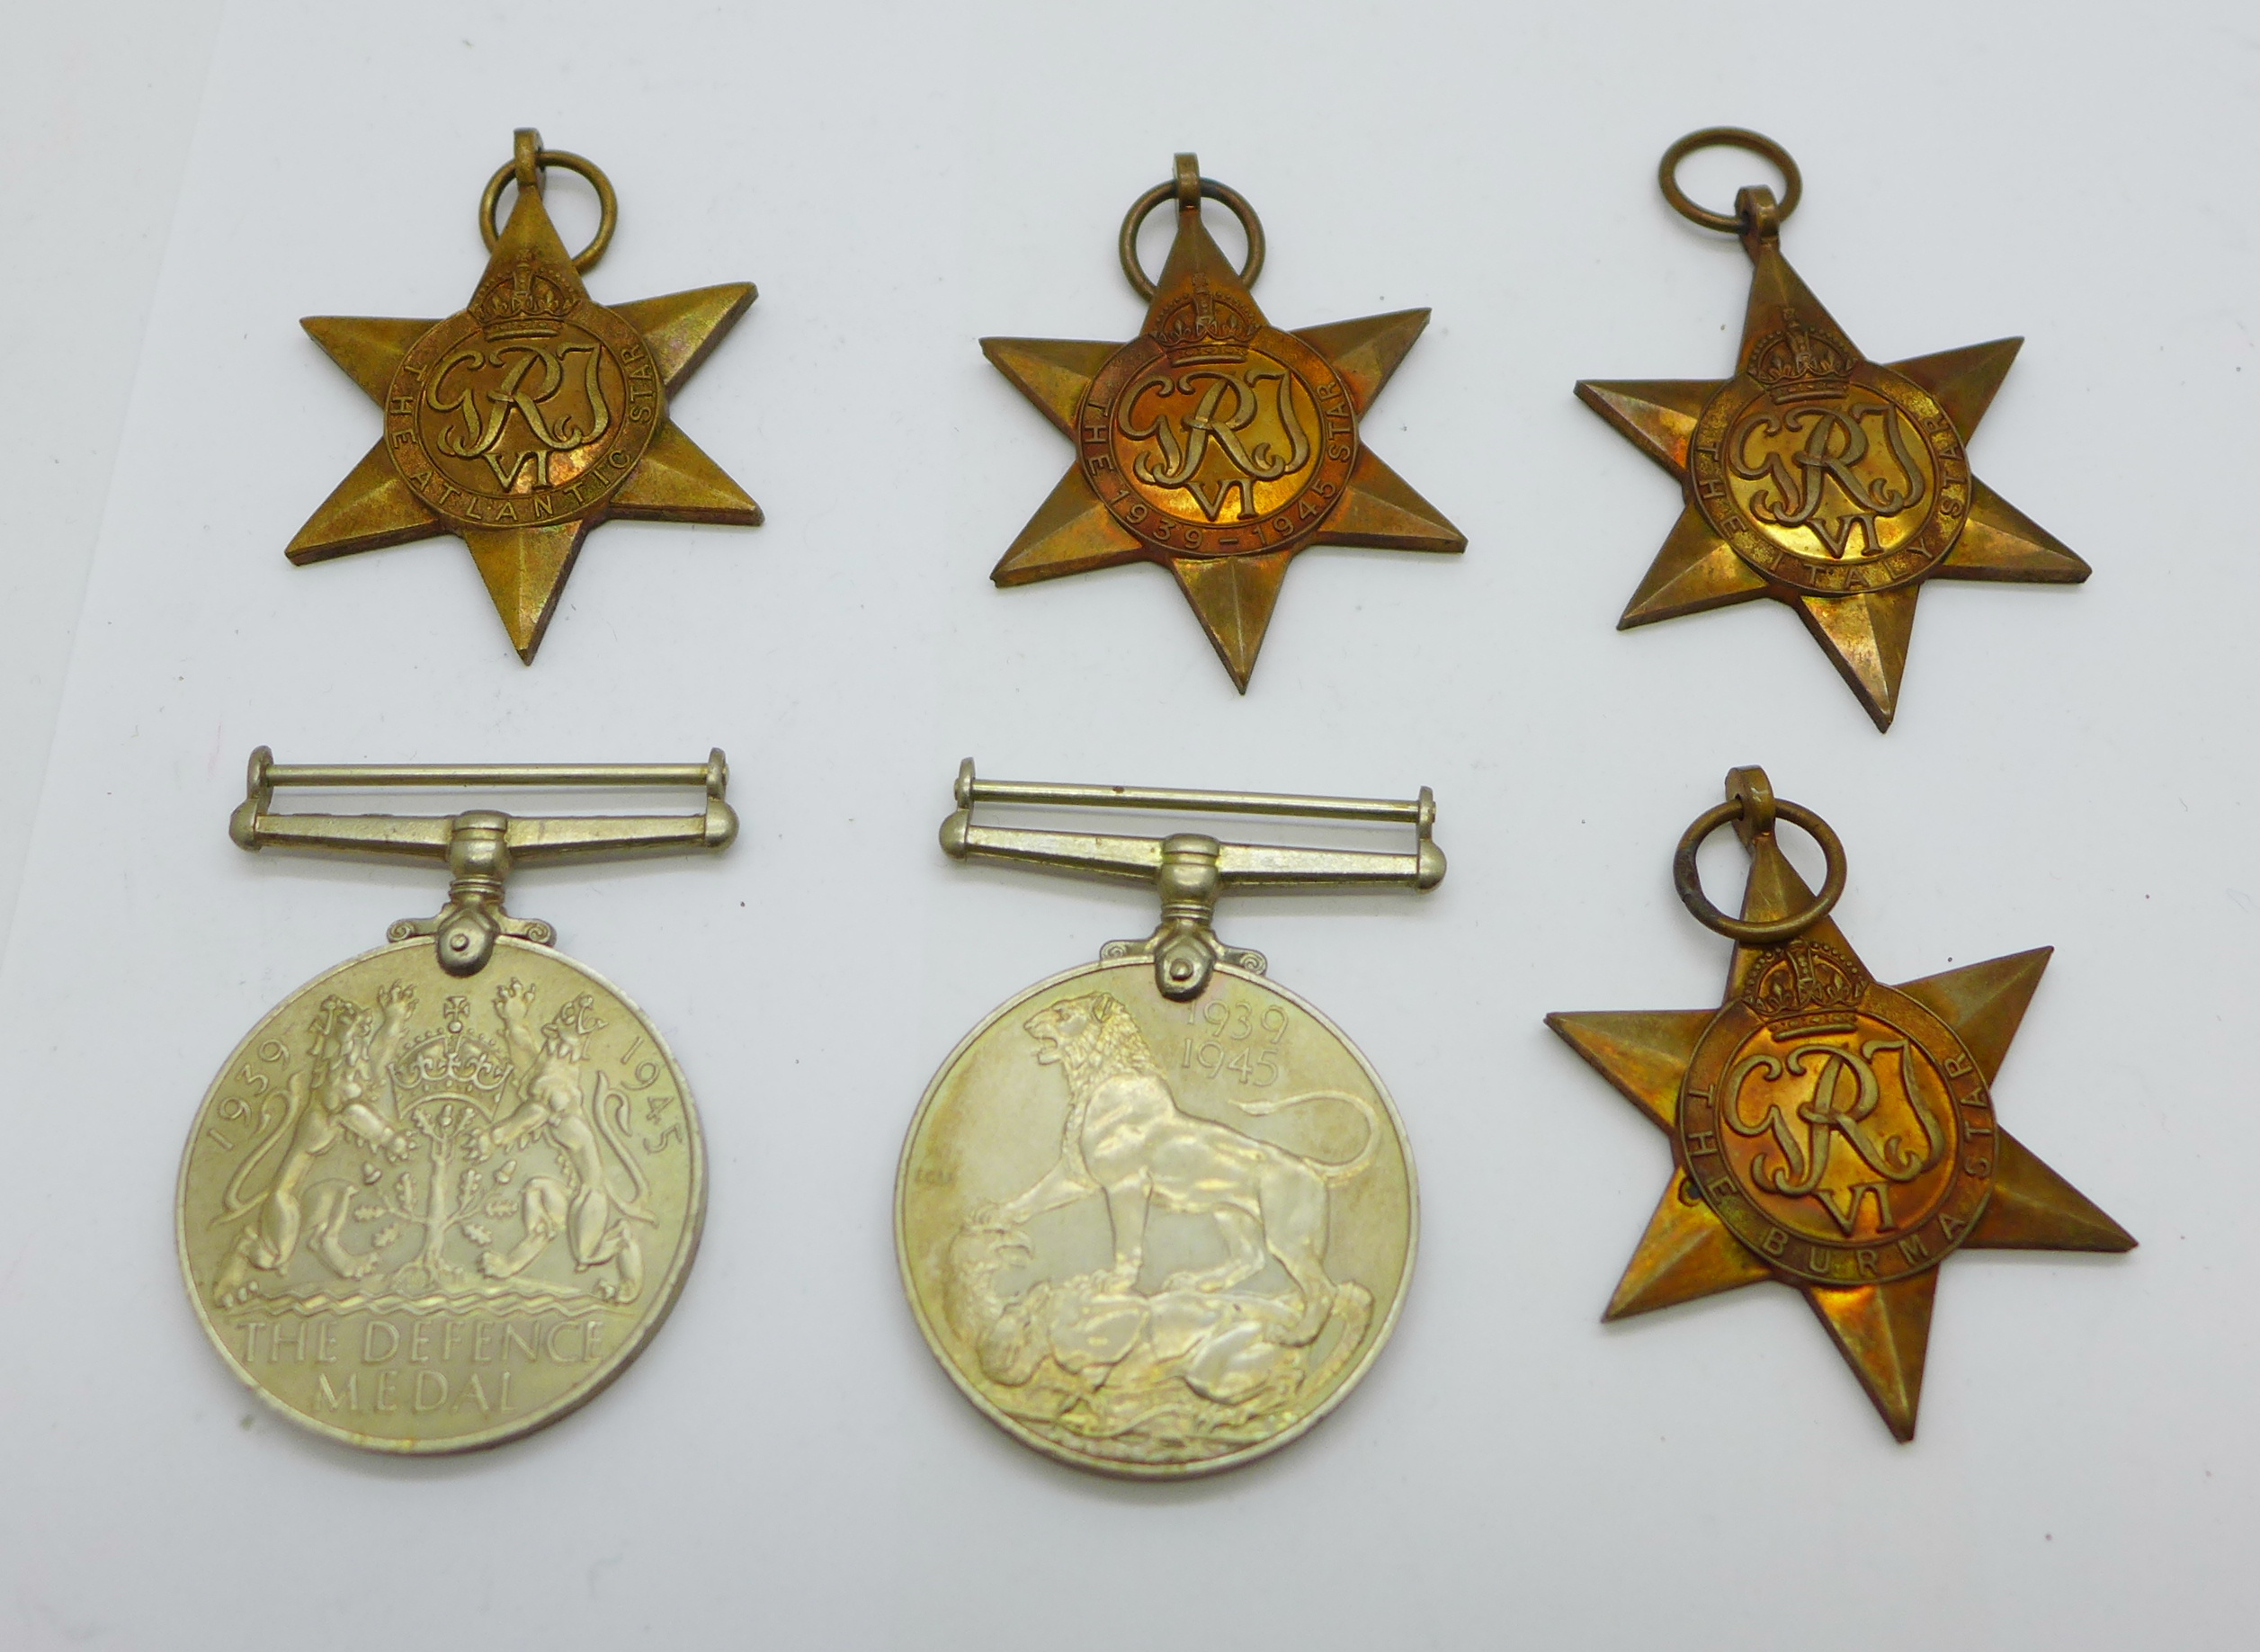 Six WWII medals